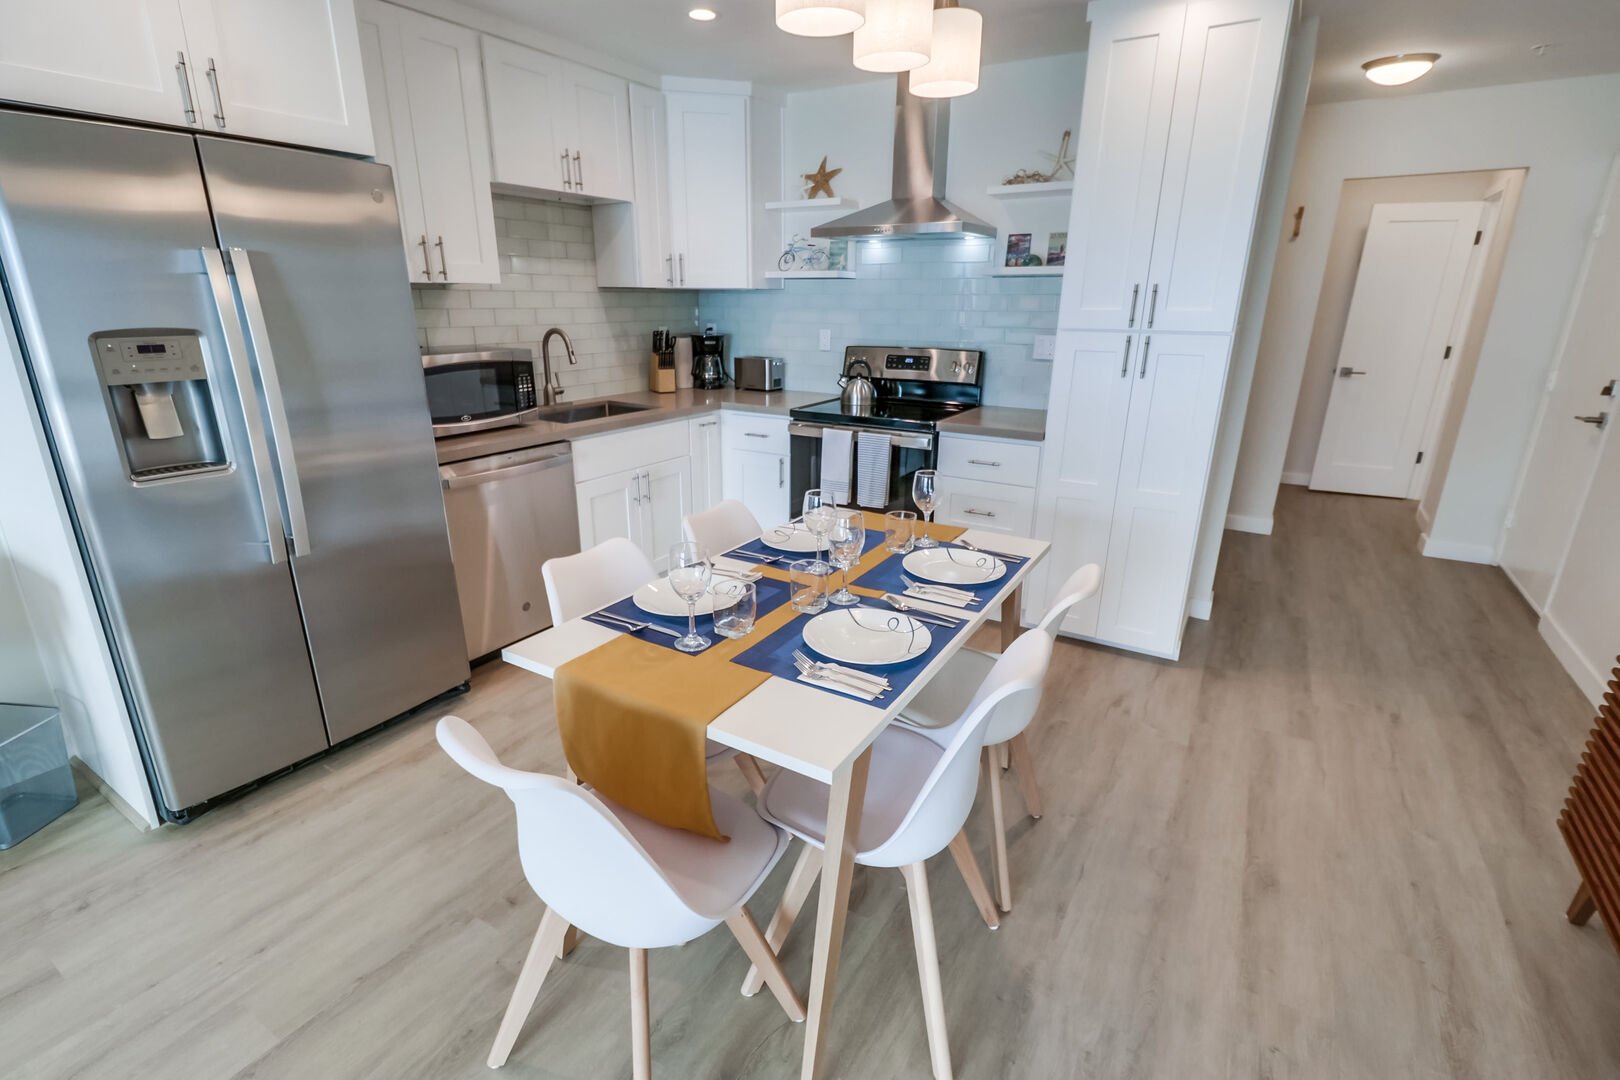 Open-style kitchen with modern, minimalist decor, stainless steel appliances, microwave, refrigerator and freezer with ice/water dispenser, toaster, standard coffee maker, electric stove top and oven, overhead lighting, dining for 5 guests and plenty of storage and pantry space